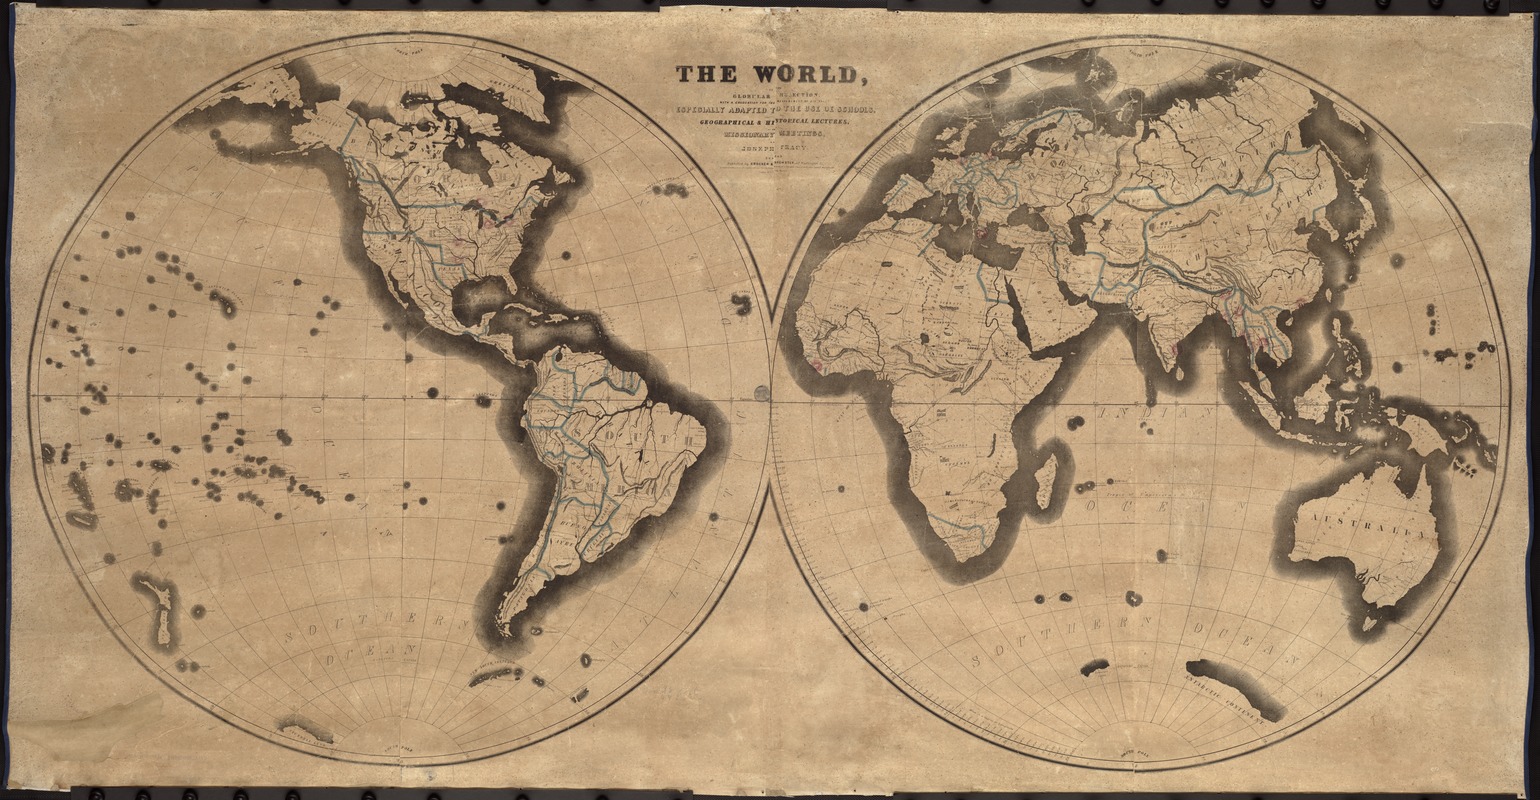 The World, on the globular projection with a graduation for the measurement of distances especially adapted for the use oe [sic] schools, geographical & historical lectures, and missionary meetings